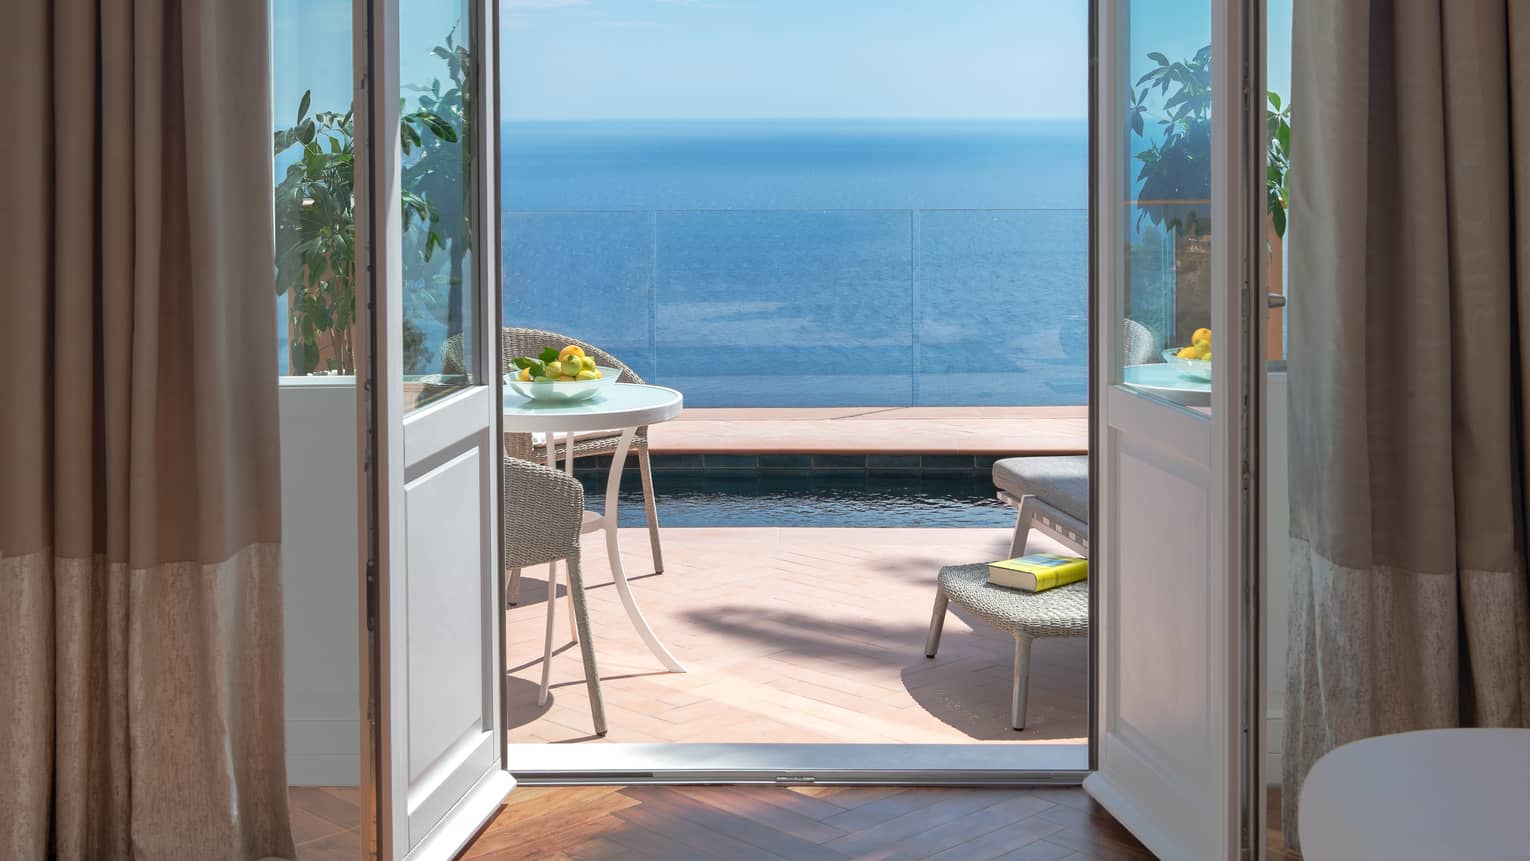 Door leading to private terrace with plunge pool overlooking the sea